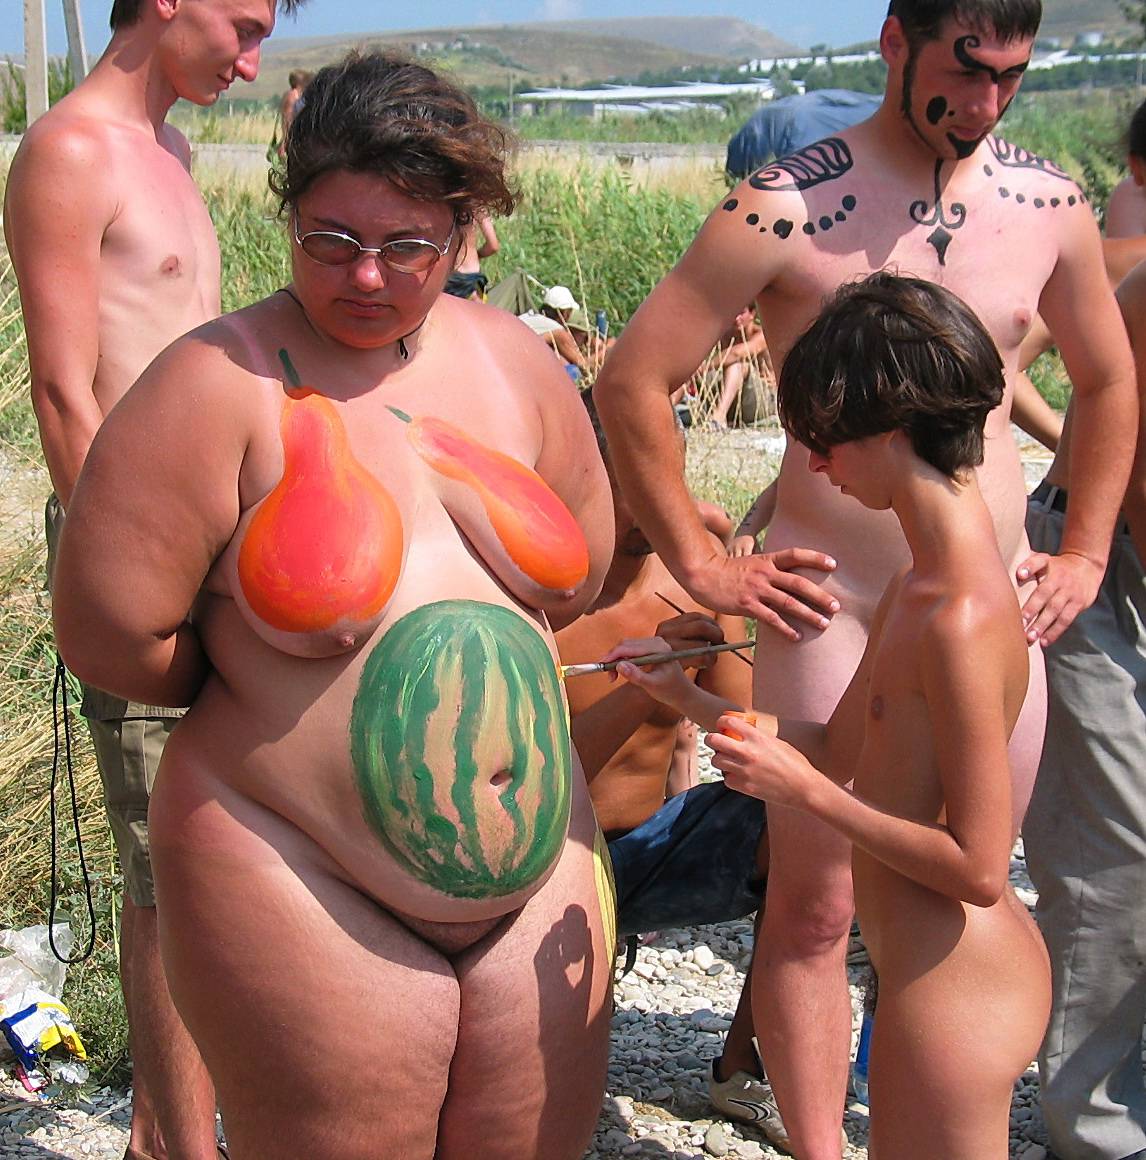 Family Nudism - Body Painting All Day Long - 2